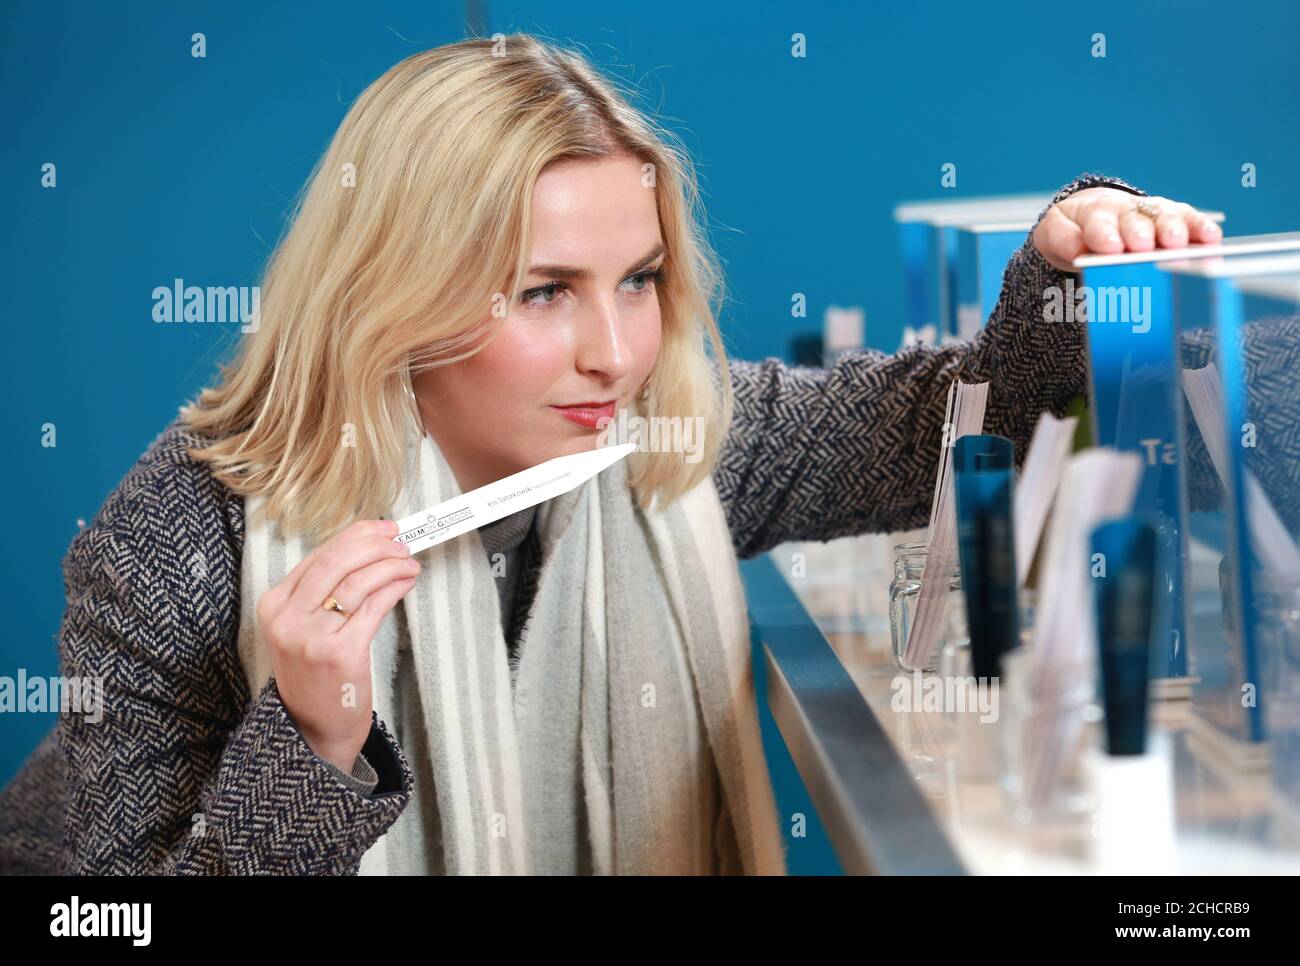 Alice Cousins, 25 from London, tries one of six bottled scents created from the natural odours of six men from online dating site Match at its pop up store called Eau.M.G (Eau Mon Garcon) in Exmouth Market, London. PRESS ASSOCIATION. Photo. Picture date: Wednesday February 7, 2018. The scents, which also feature the men's dating profiles, have been created in partnership with Parisian laboratory CARACTER, using 'olfactory photography' to capture the scent and bottle it. Smell plays a vital role in human attraction - when released by the body, a person's 'olfactory fingerpri Stock Photo